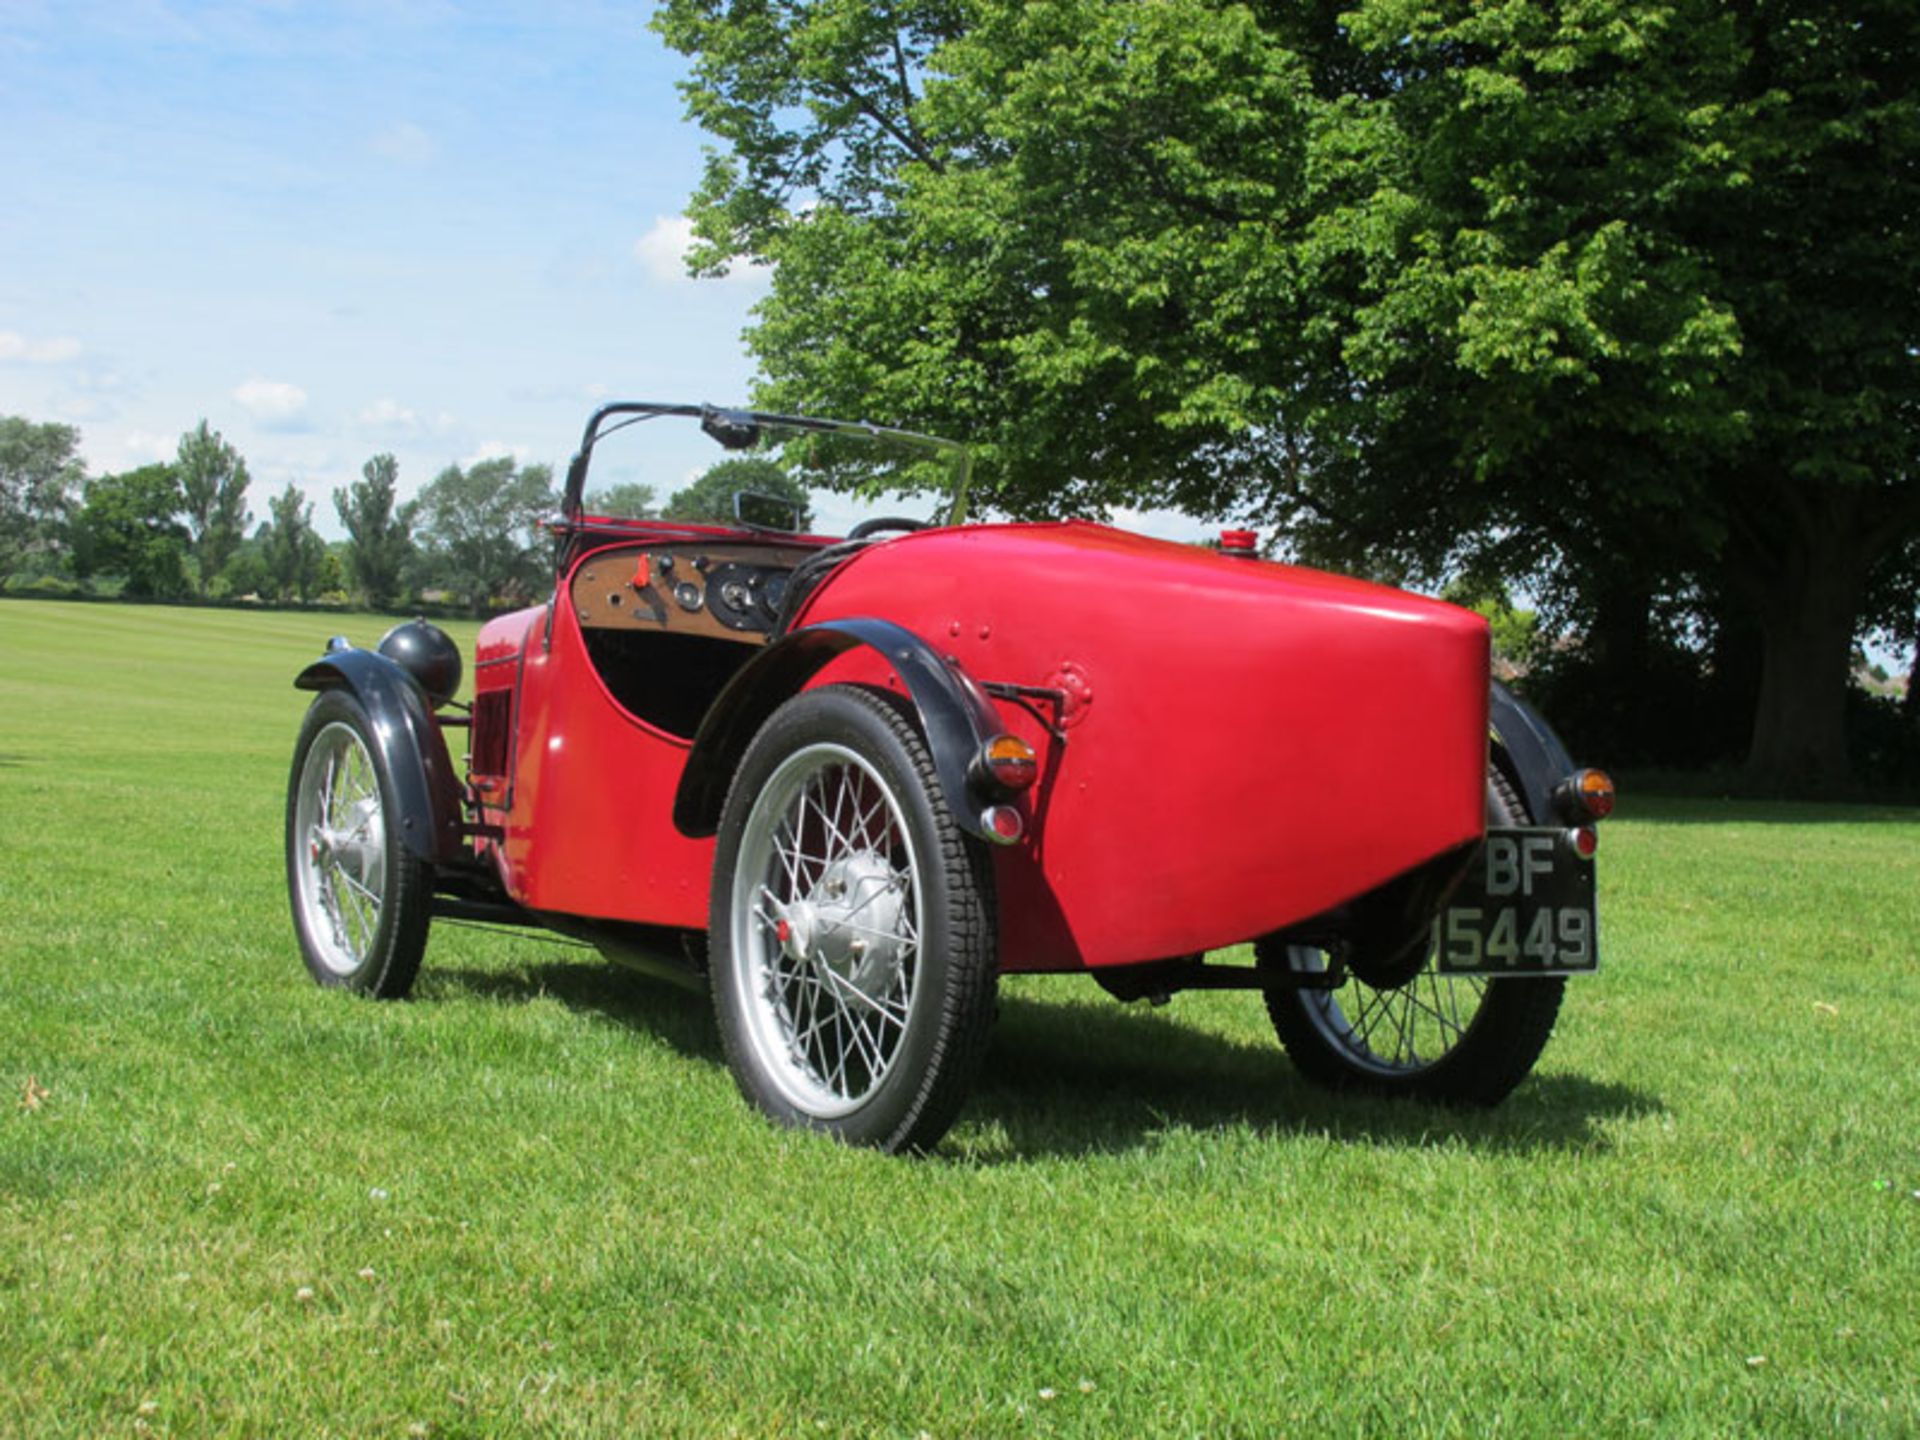 - Rare LR2/R5 model only available from July 1930 into 1931

- Refurbished with full-race engine and - Image 3 of 11